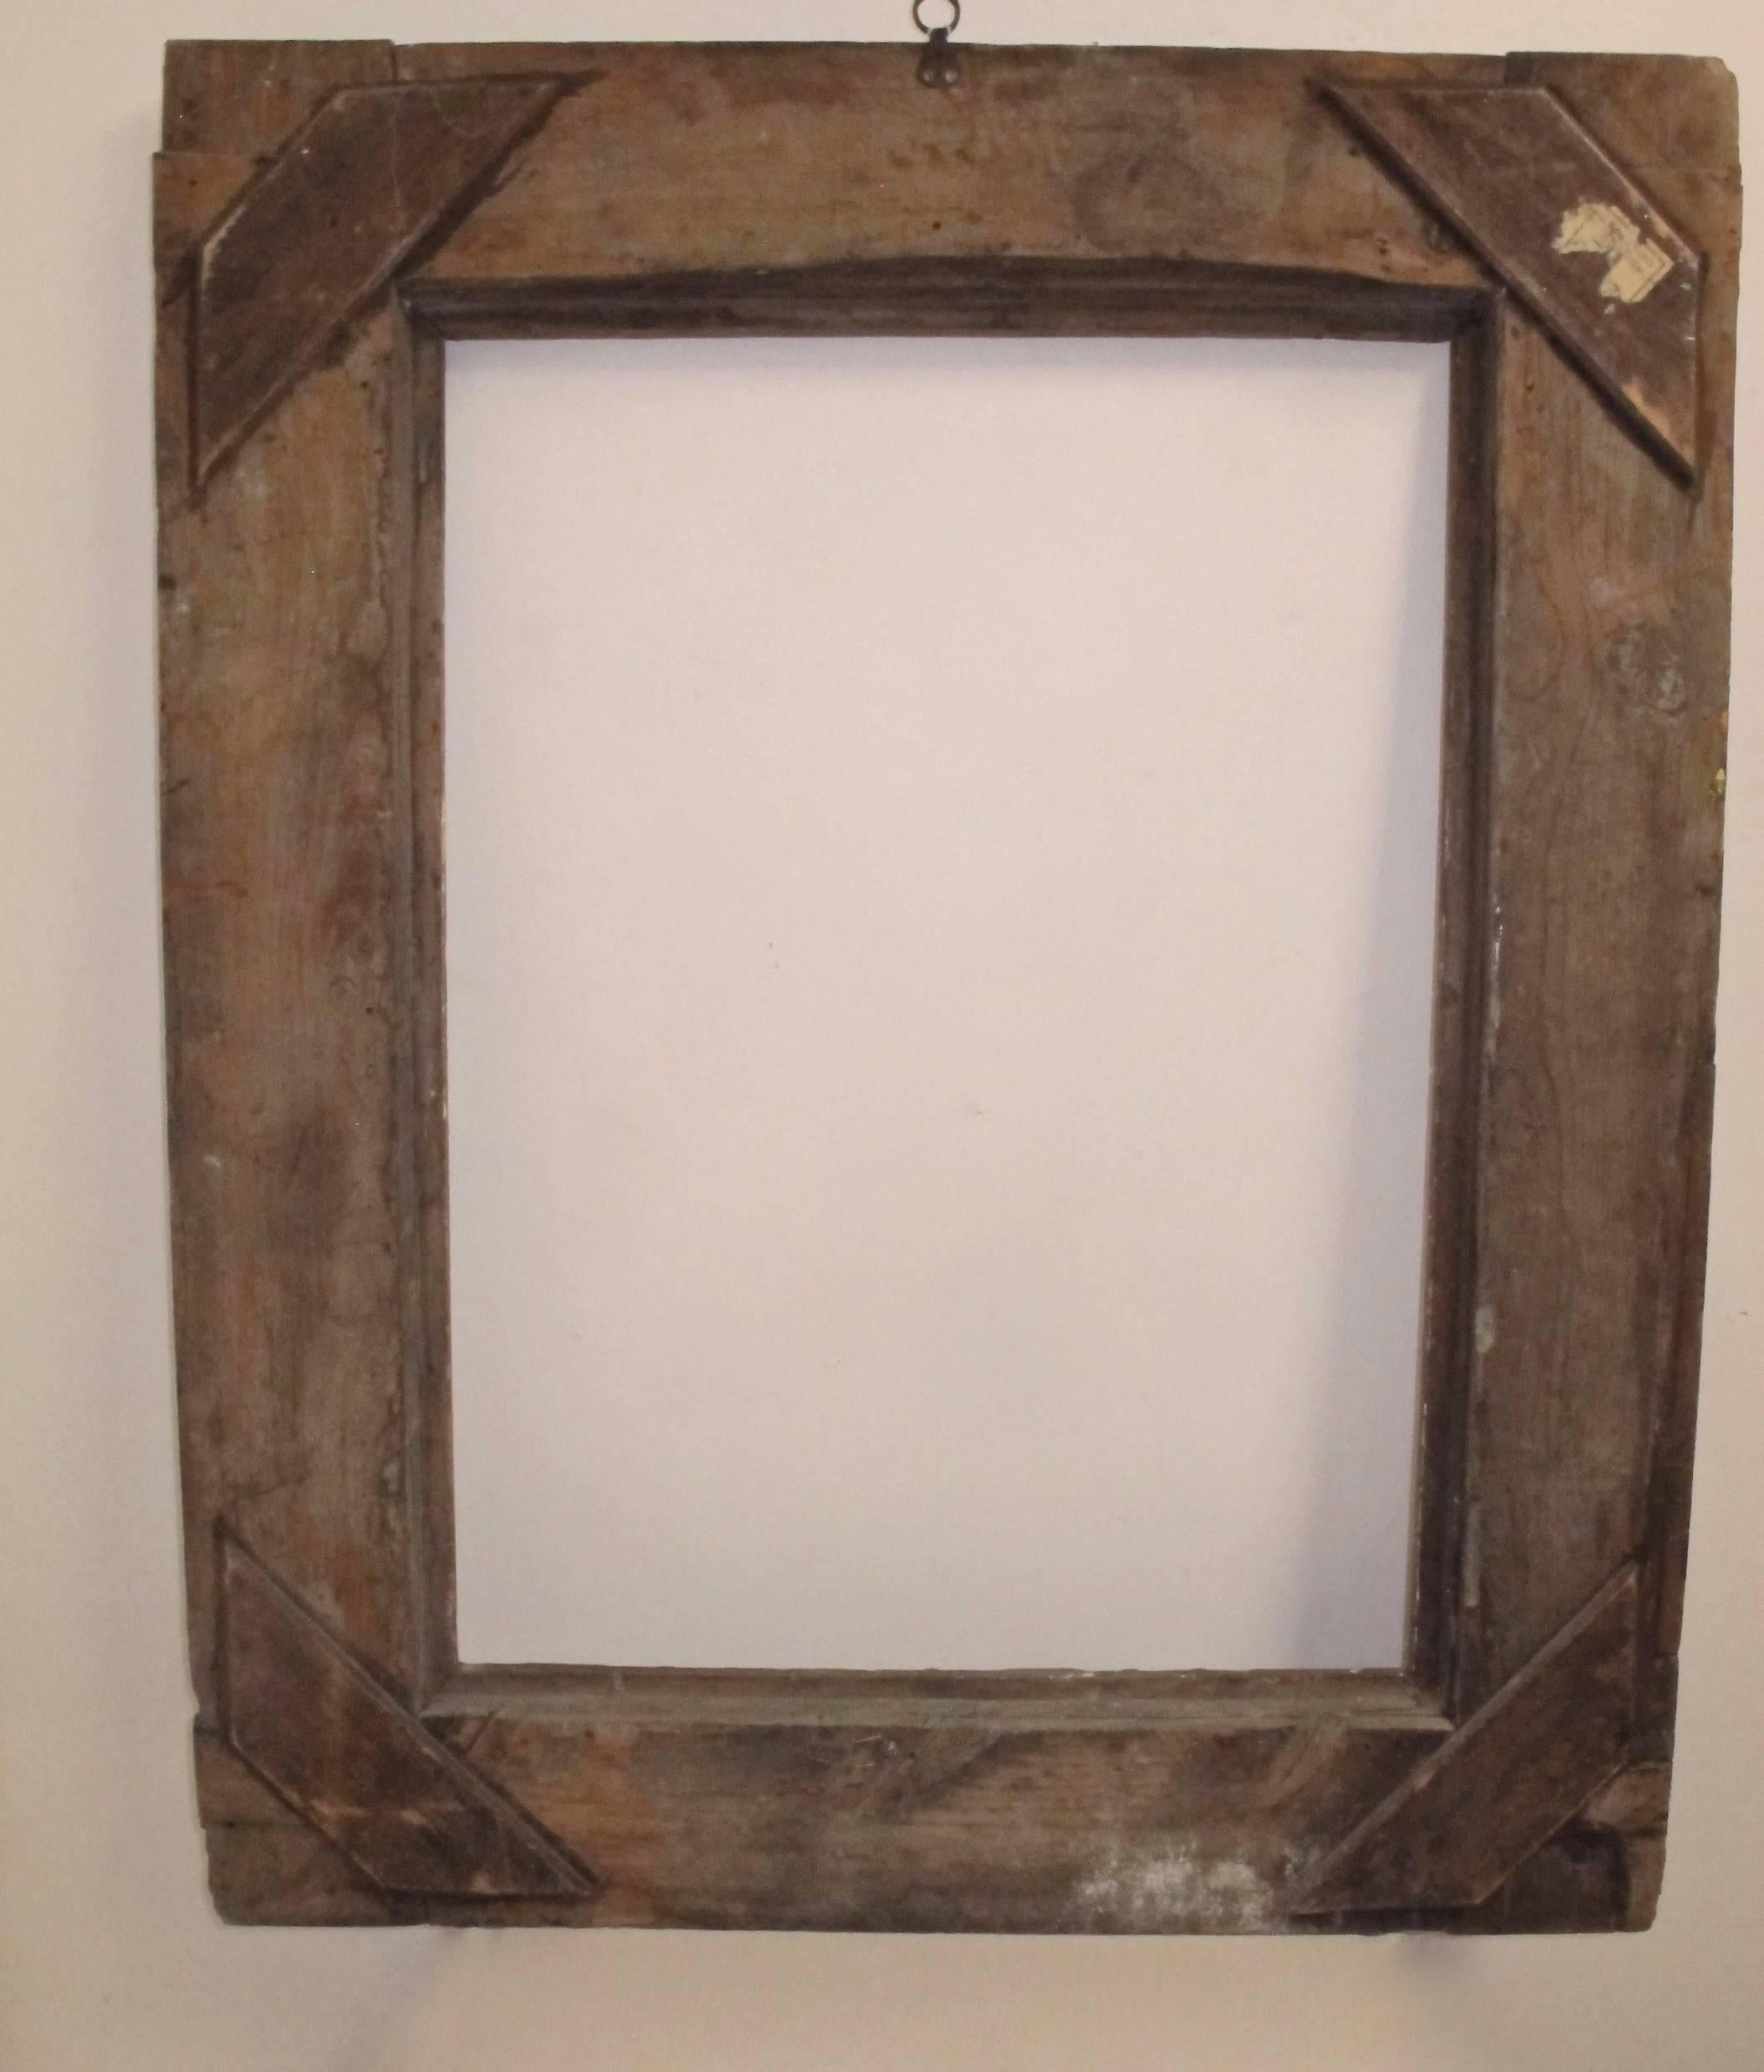 colonial frames